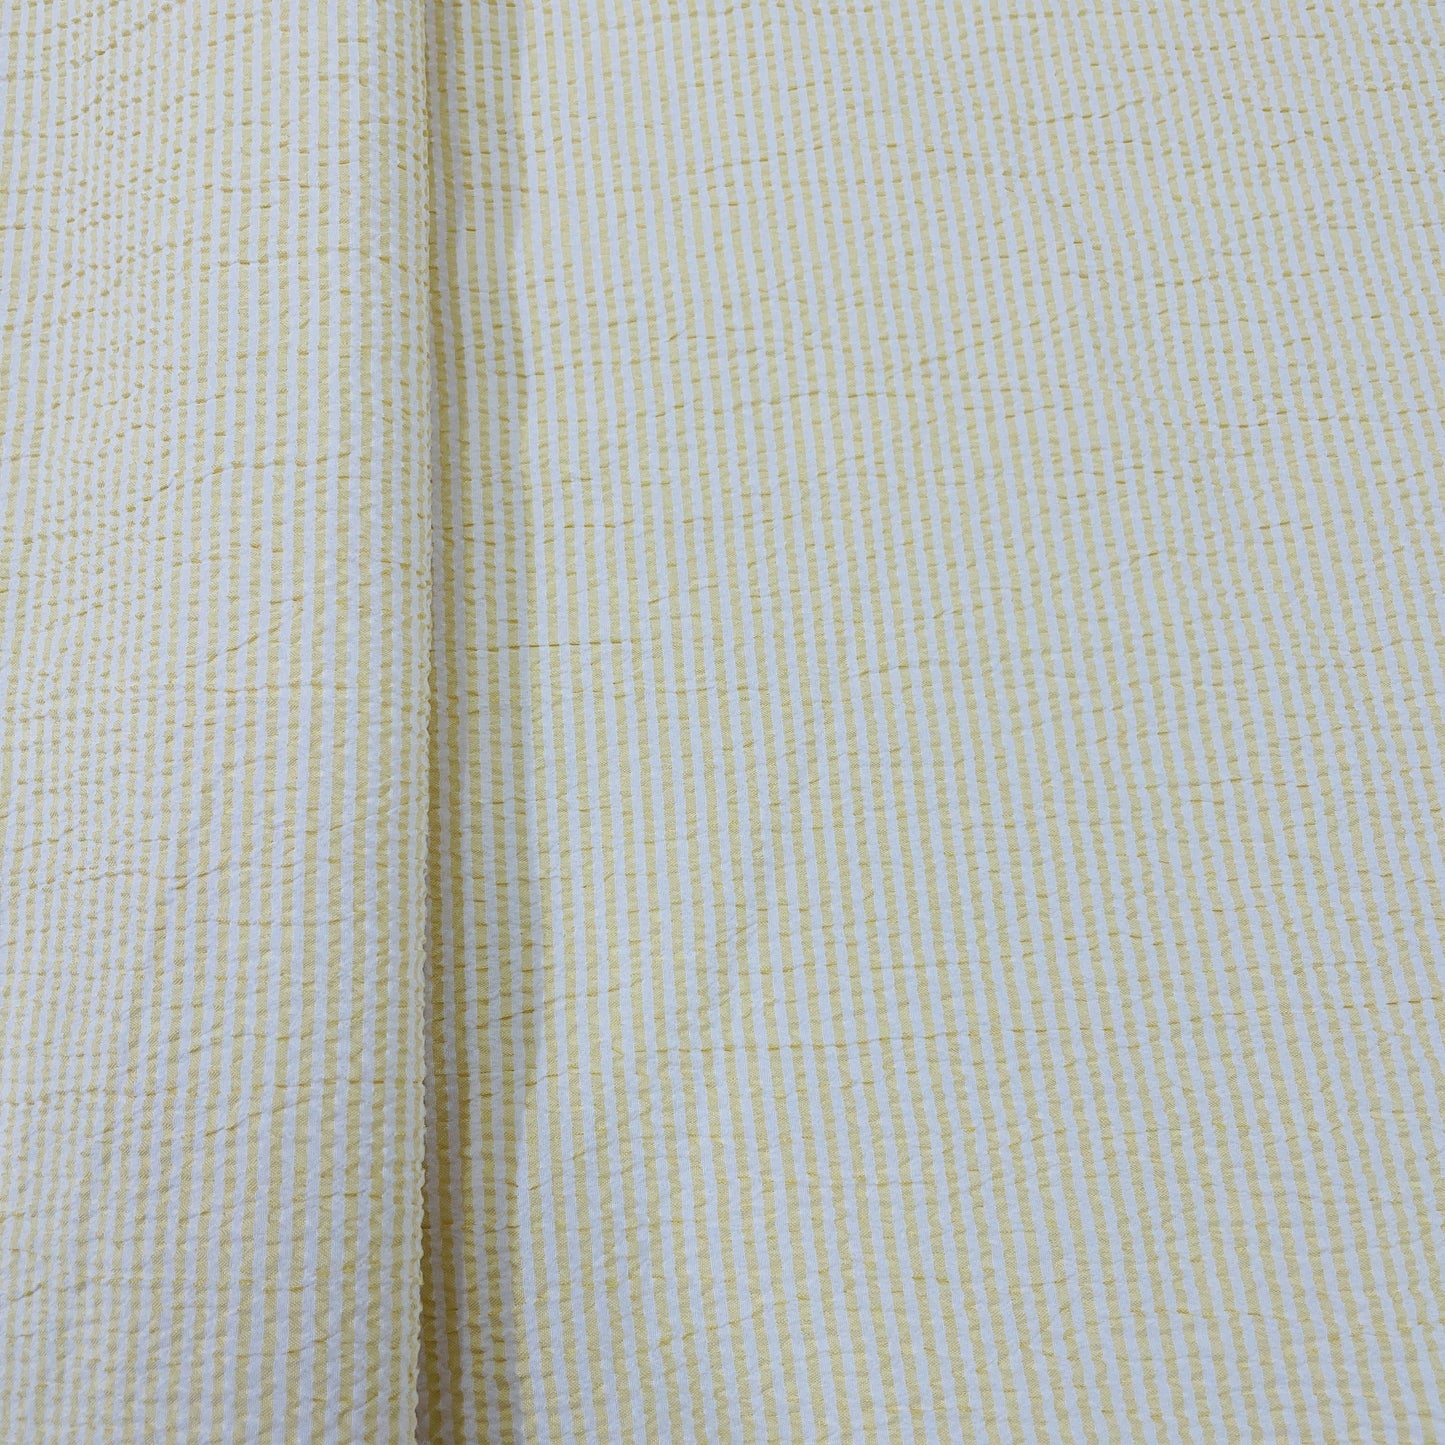 Classic White Yellow Stripe Seer Sucker Blended Cotton Fabric